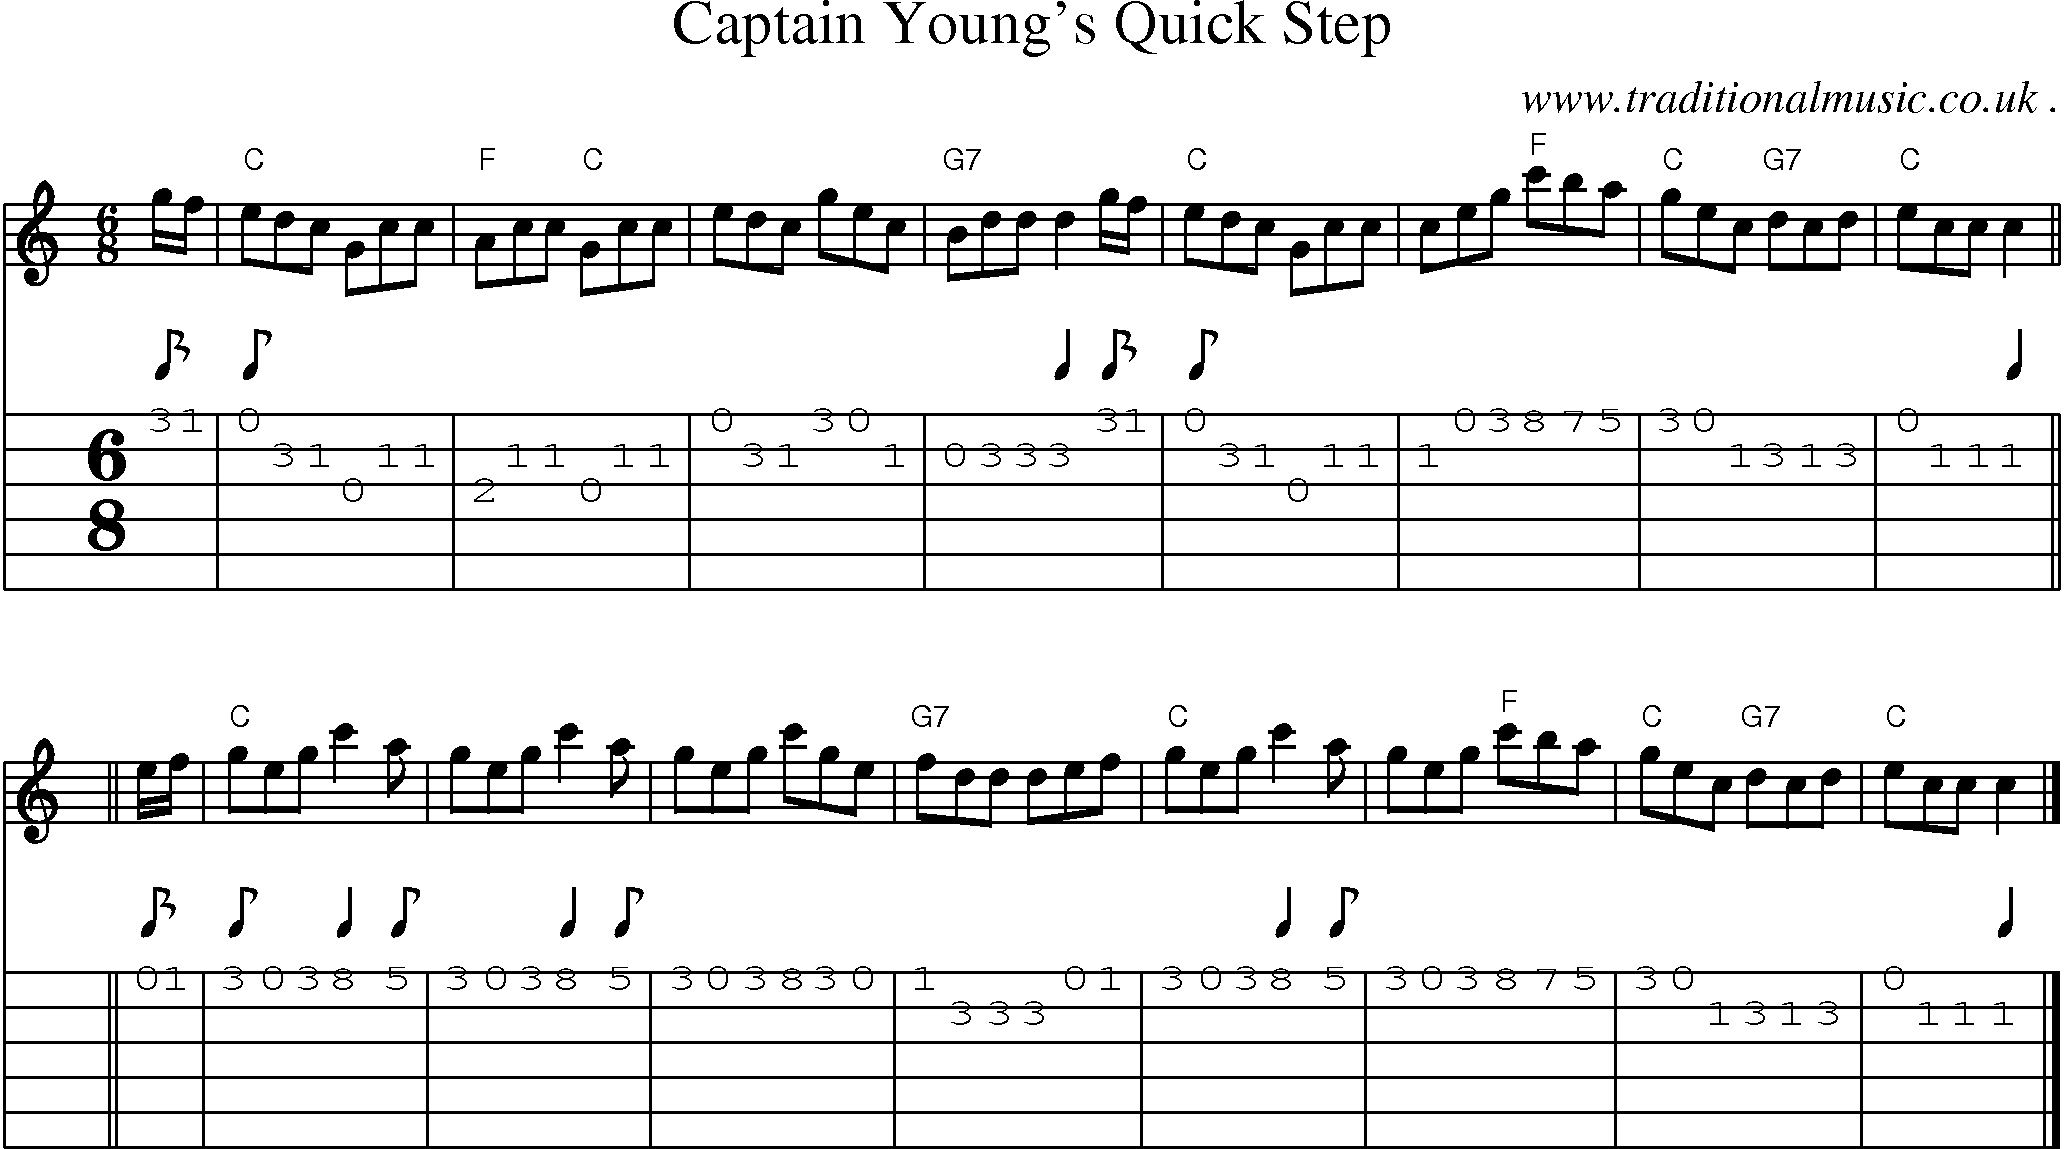 Sheet-music  score, Chords and Guitar Tabs for Captain Youngs Quick Step